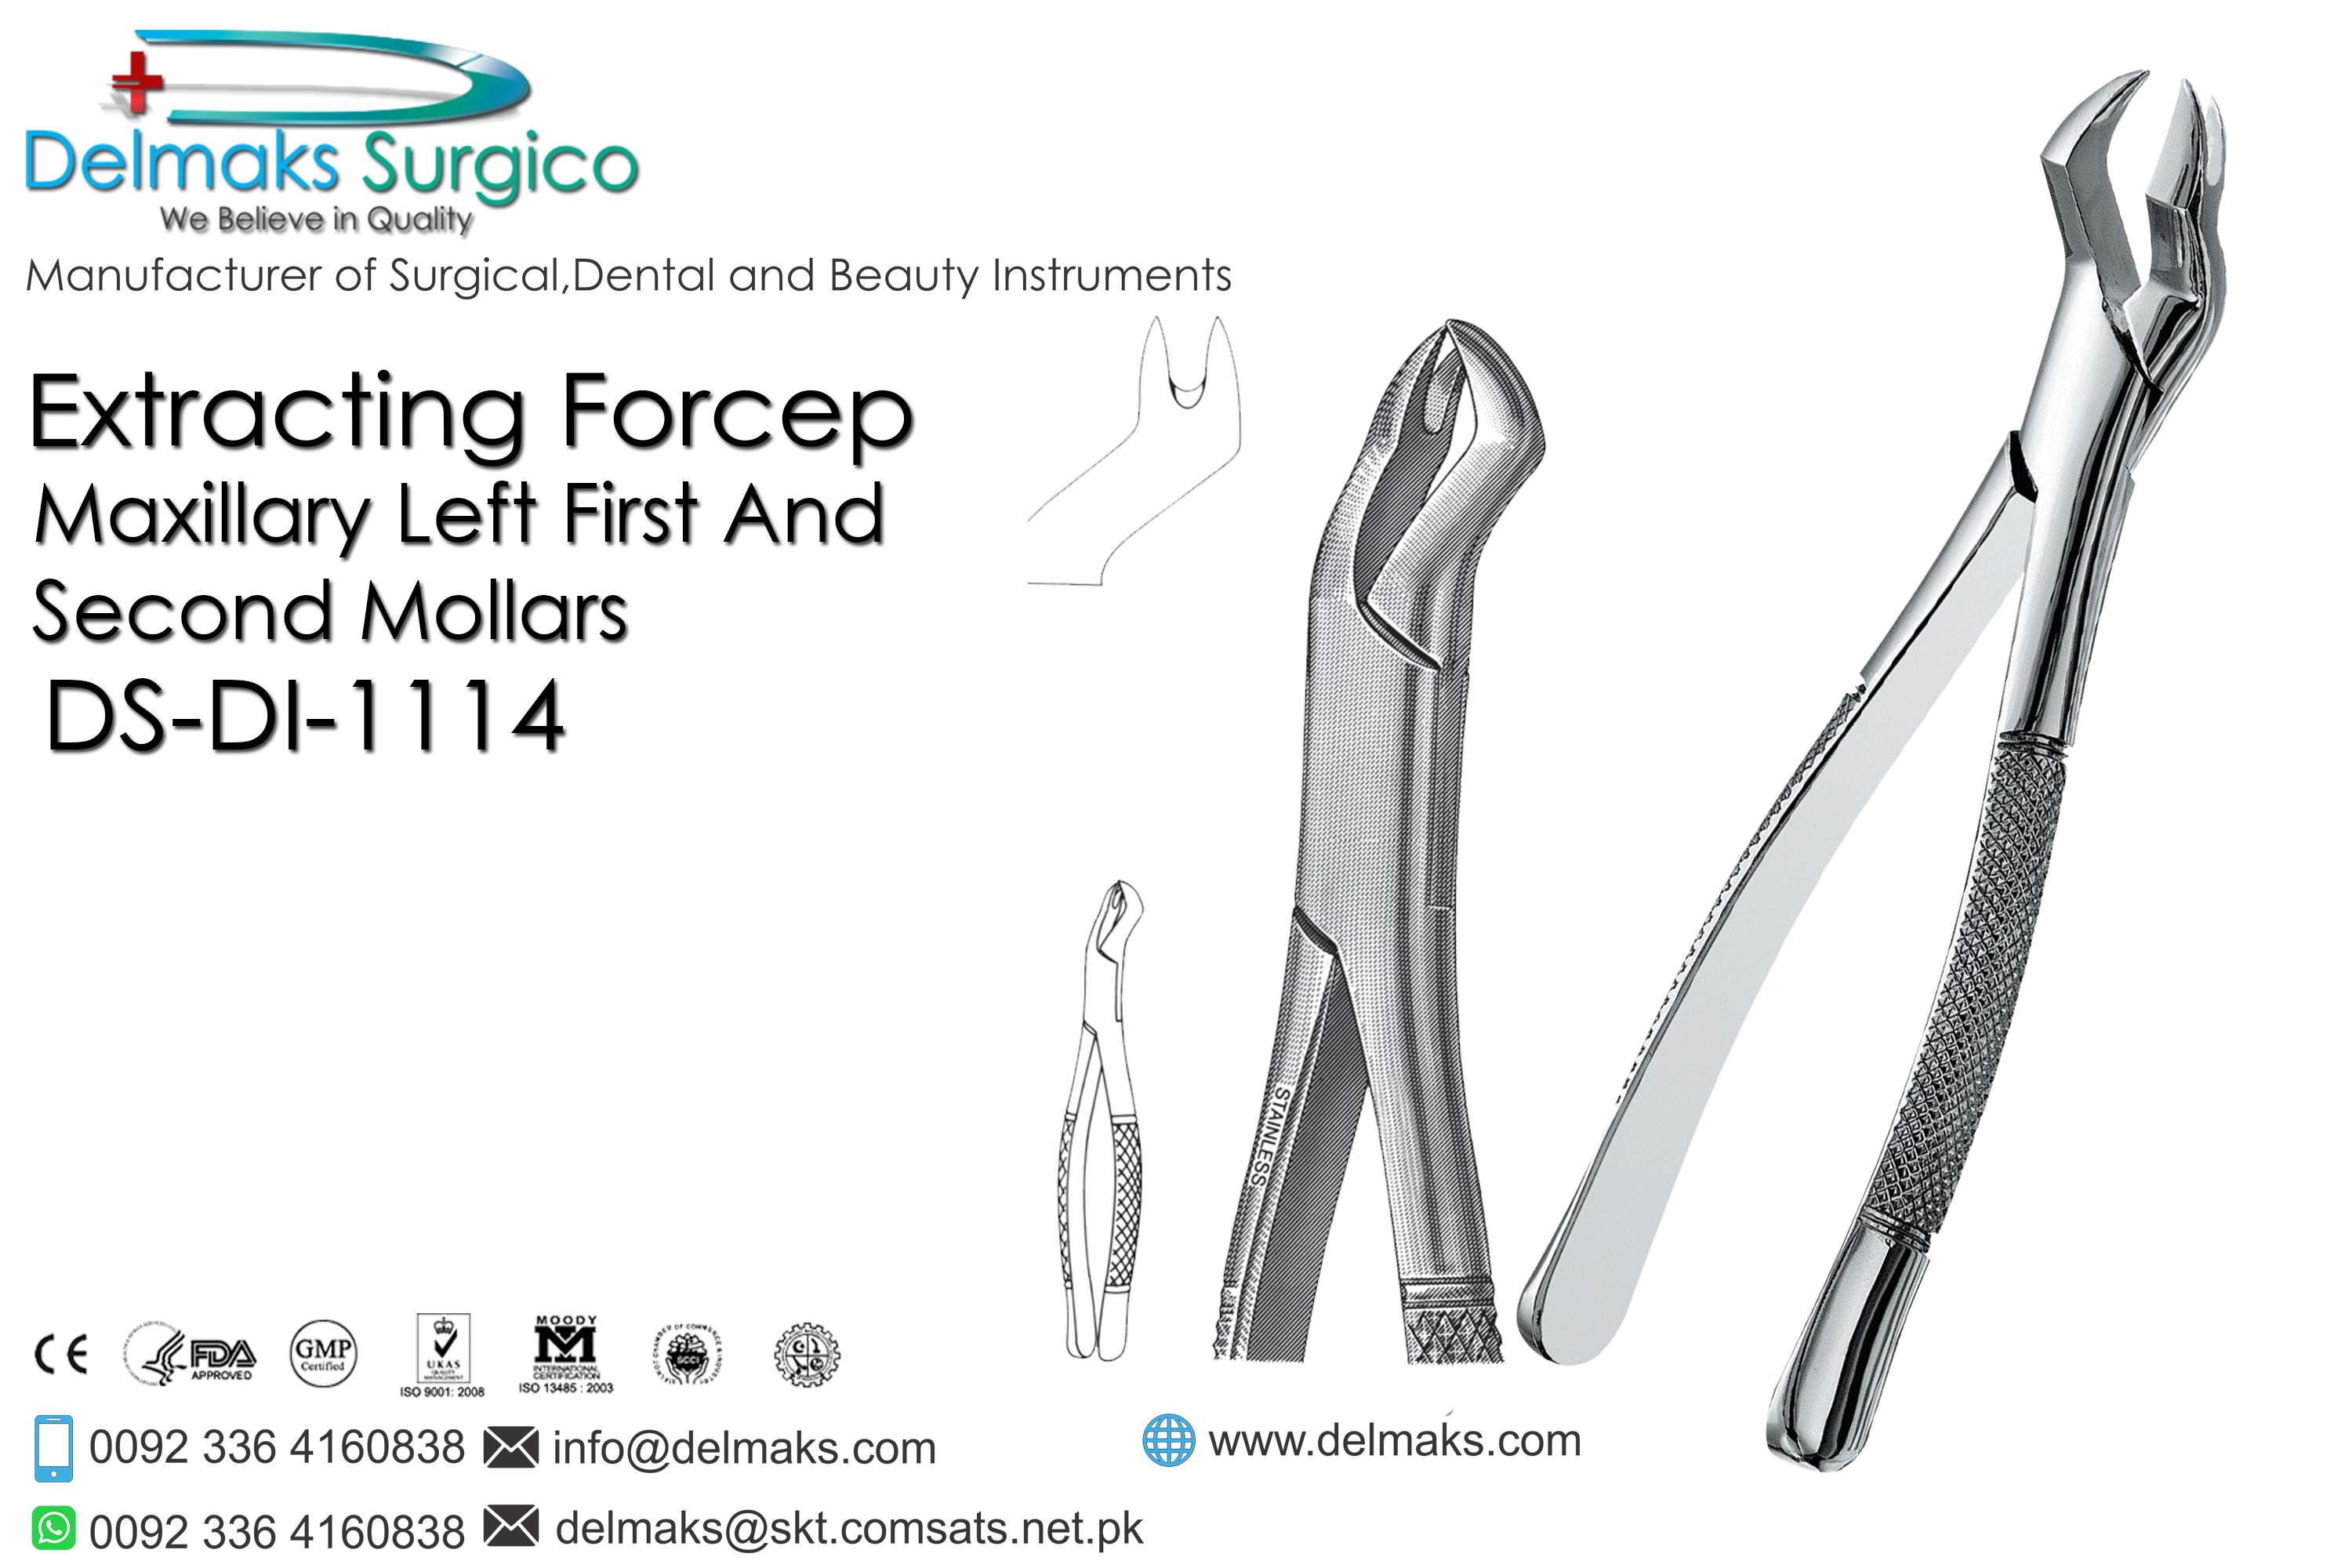 Extracting Forceps (Maxillary Left First And Second Mollars)-Oral and Maxillofacial Surgery Instruments-Dental Instruments-Delmaks Surgico 